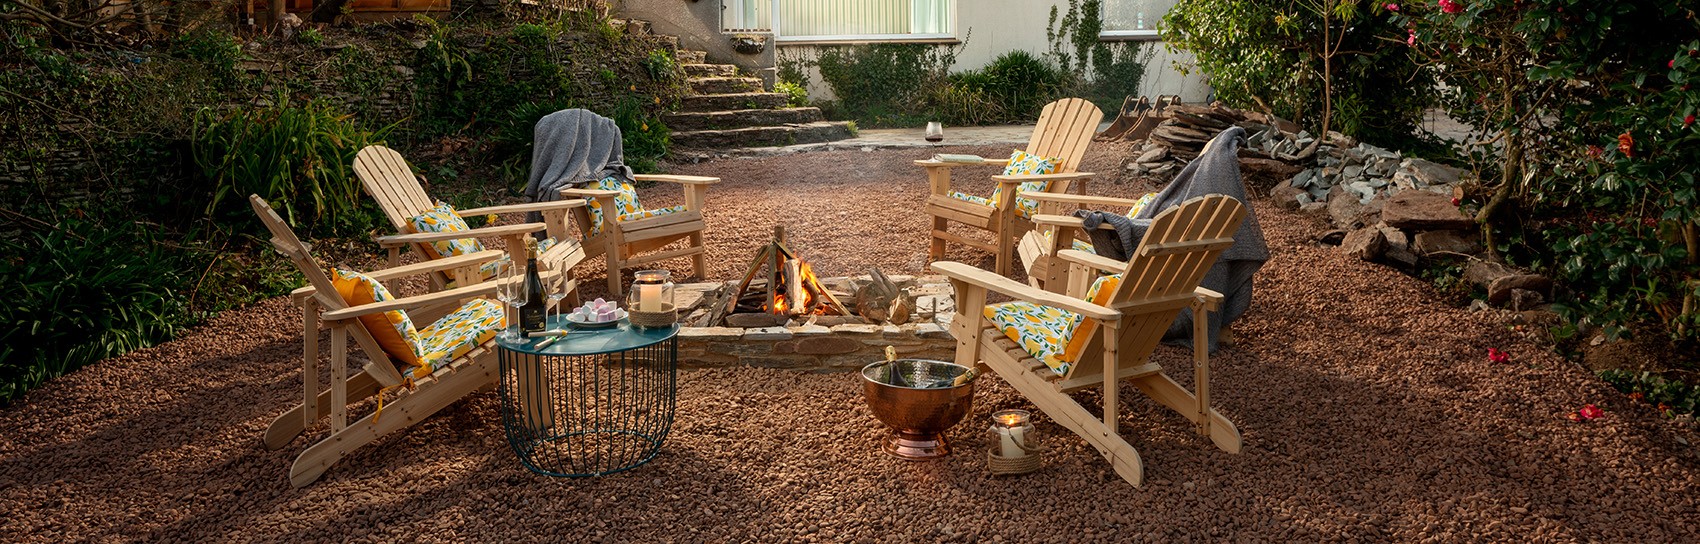 Firepit Garden Whitebeam Wood self catering holiday cottage. Photograph by WHITEBEAM WOOD